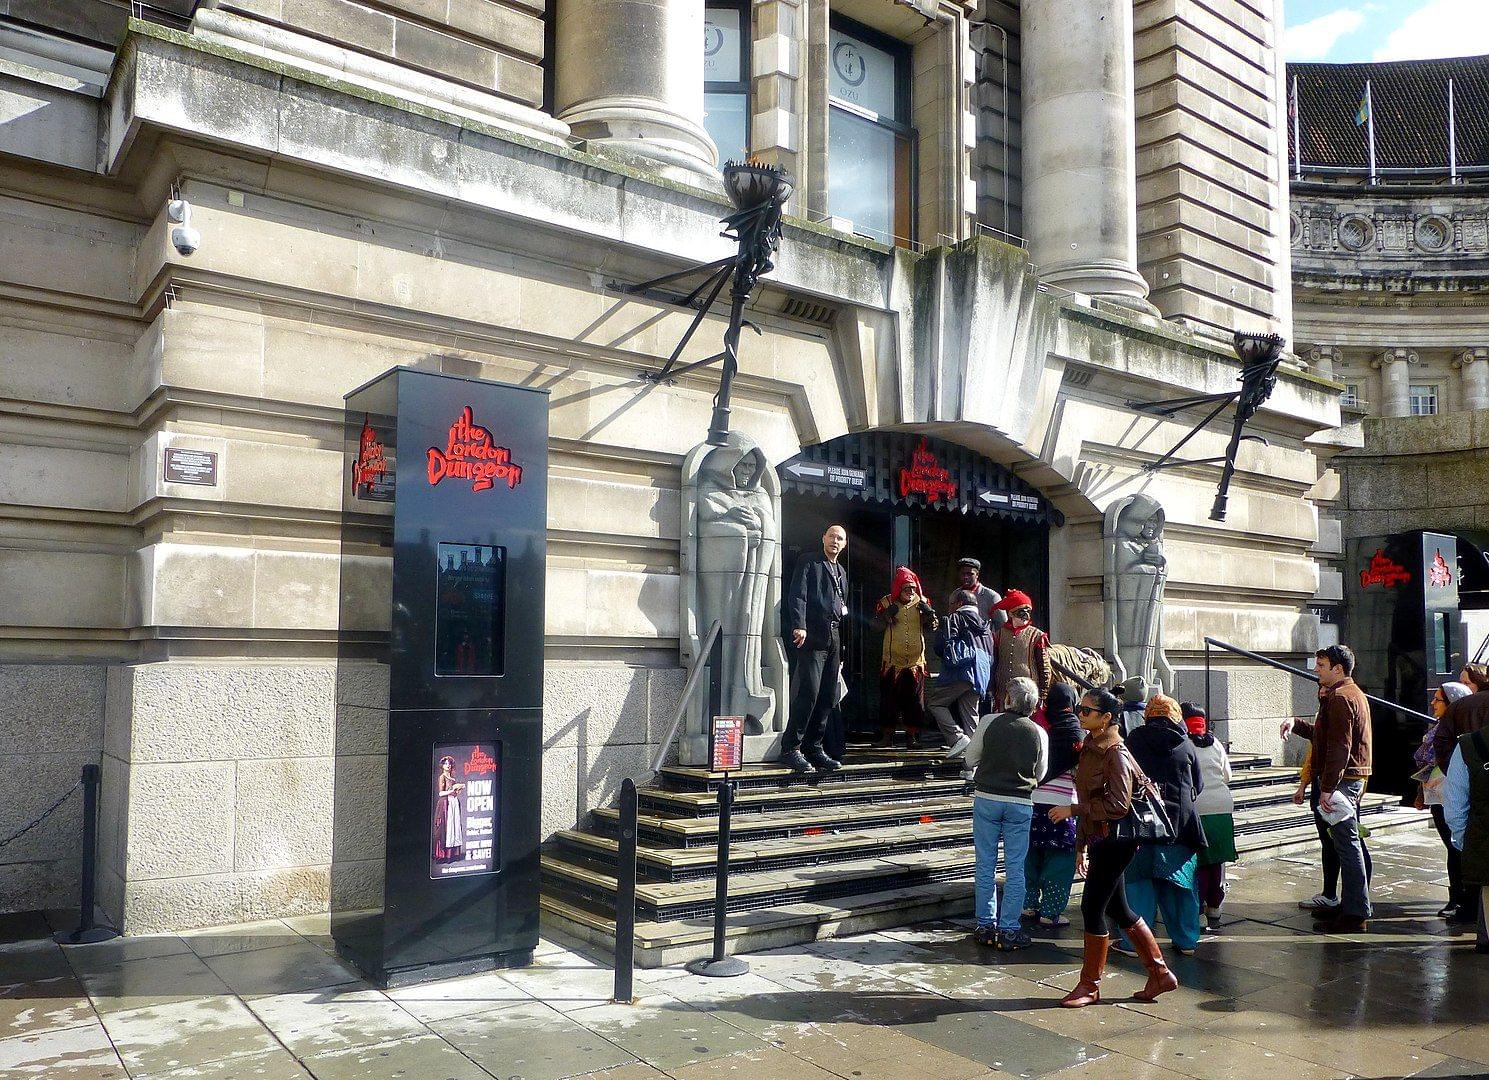 Experience The London Dungeon